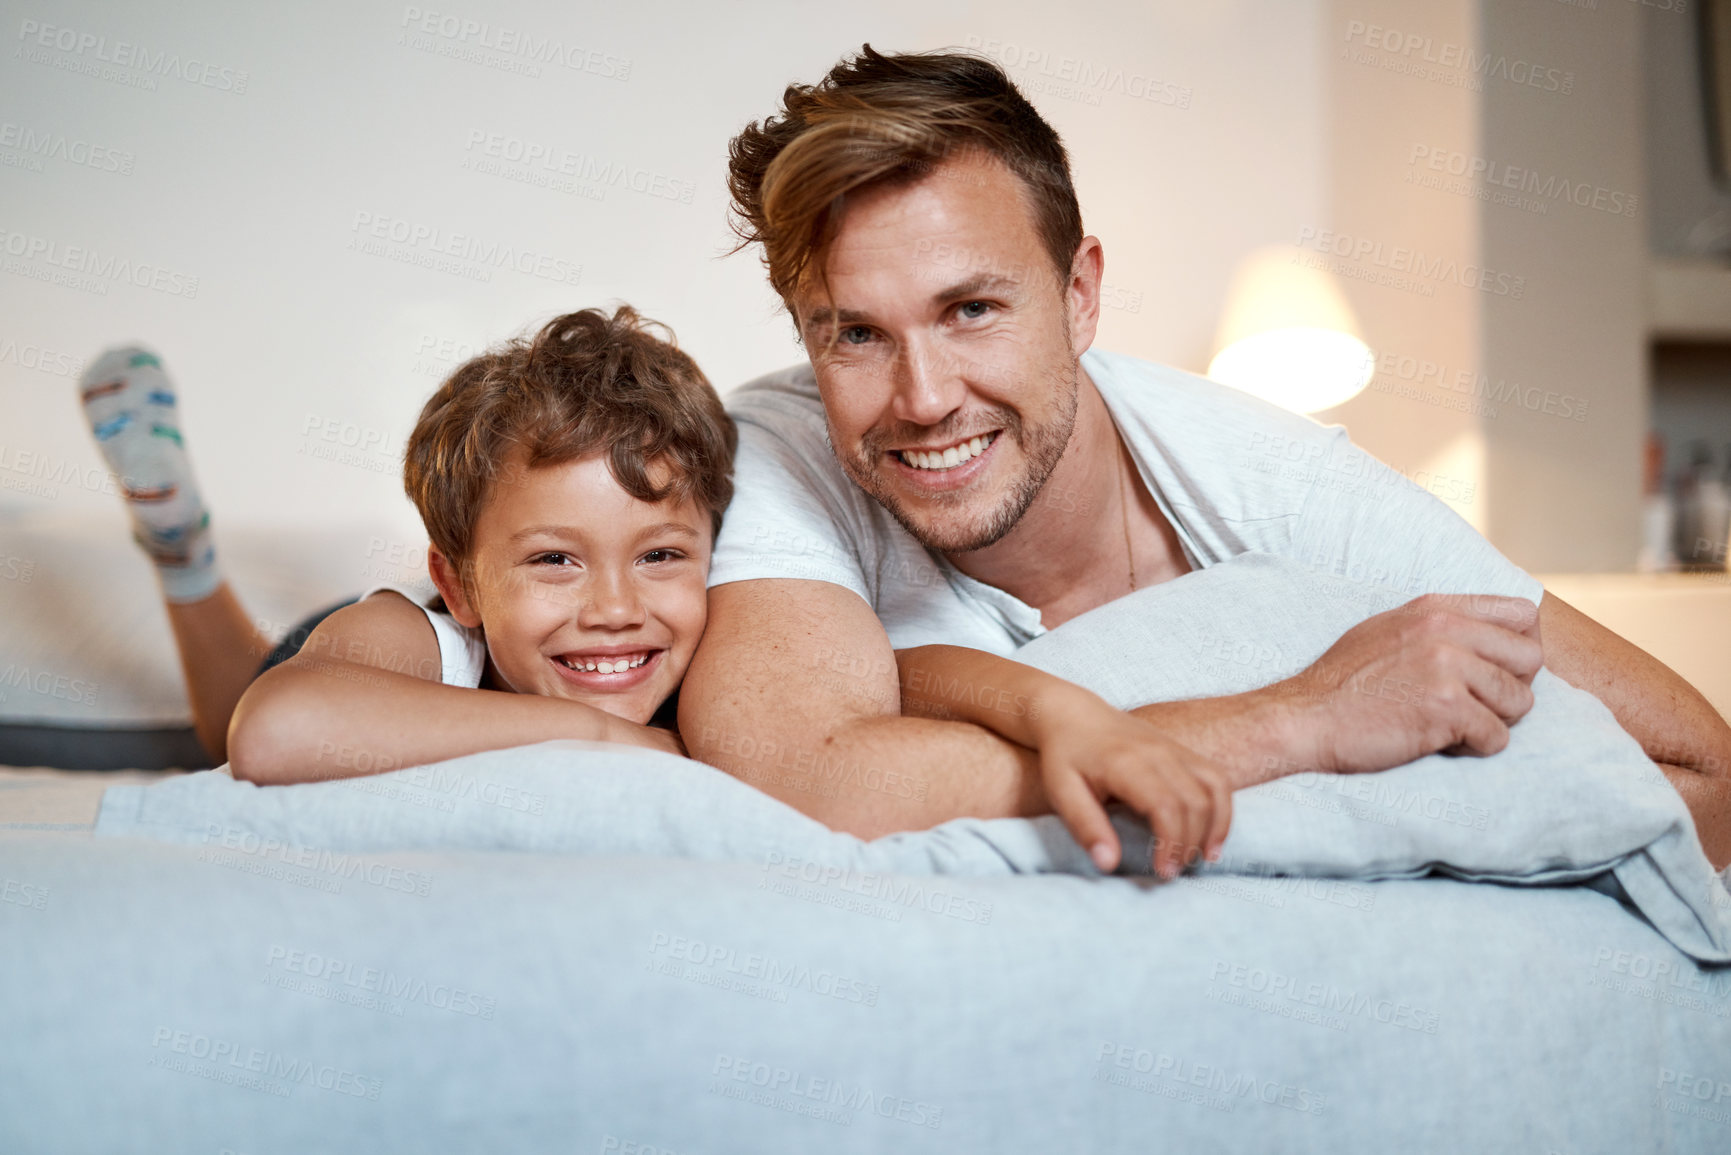 Buy stock photo Shot of a man and his son lying on a bed together